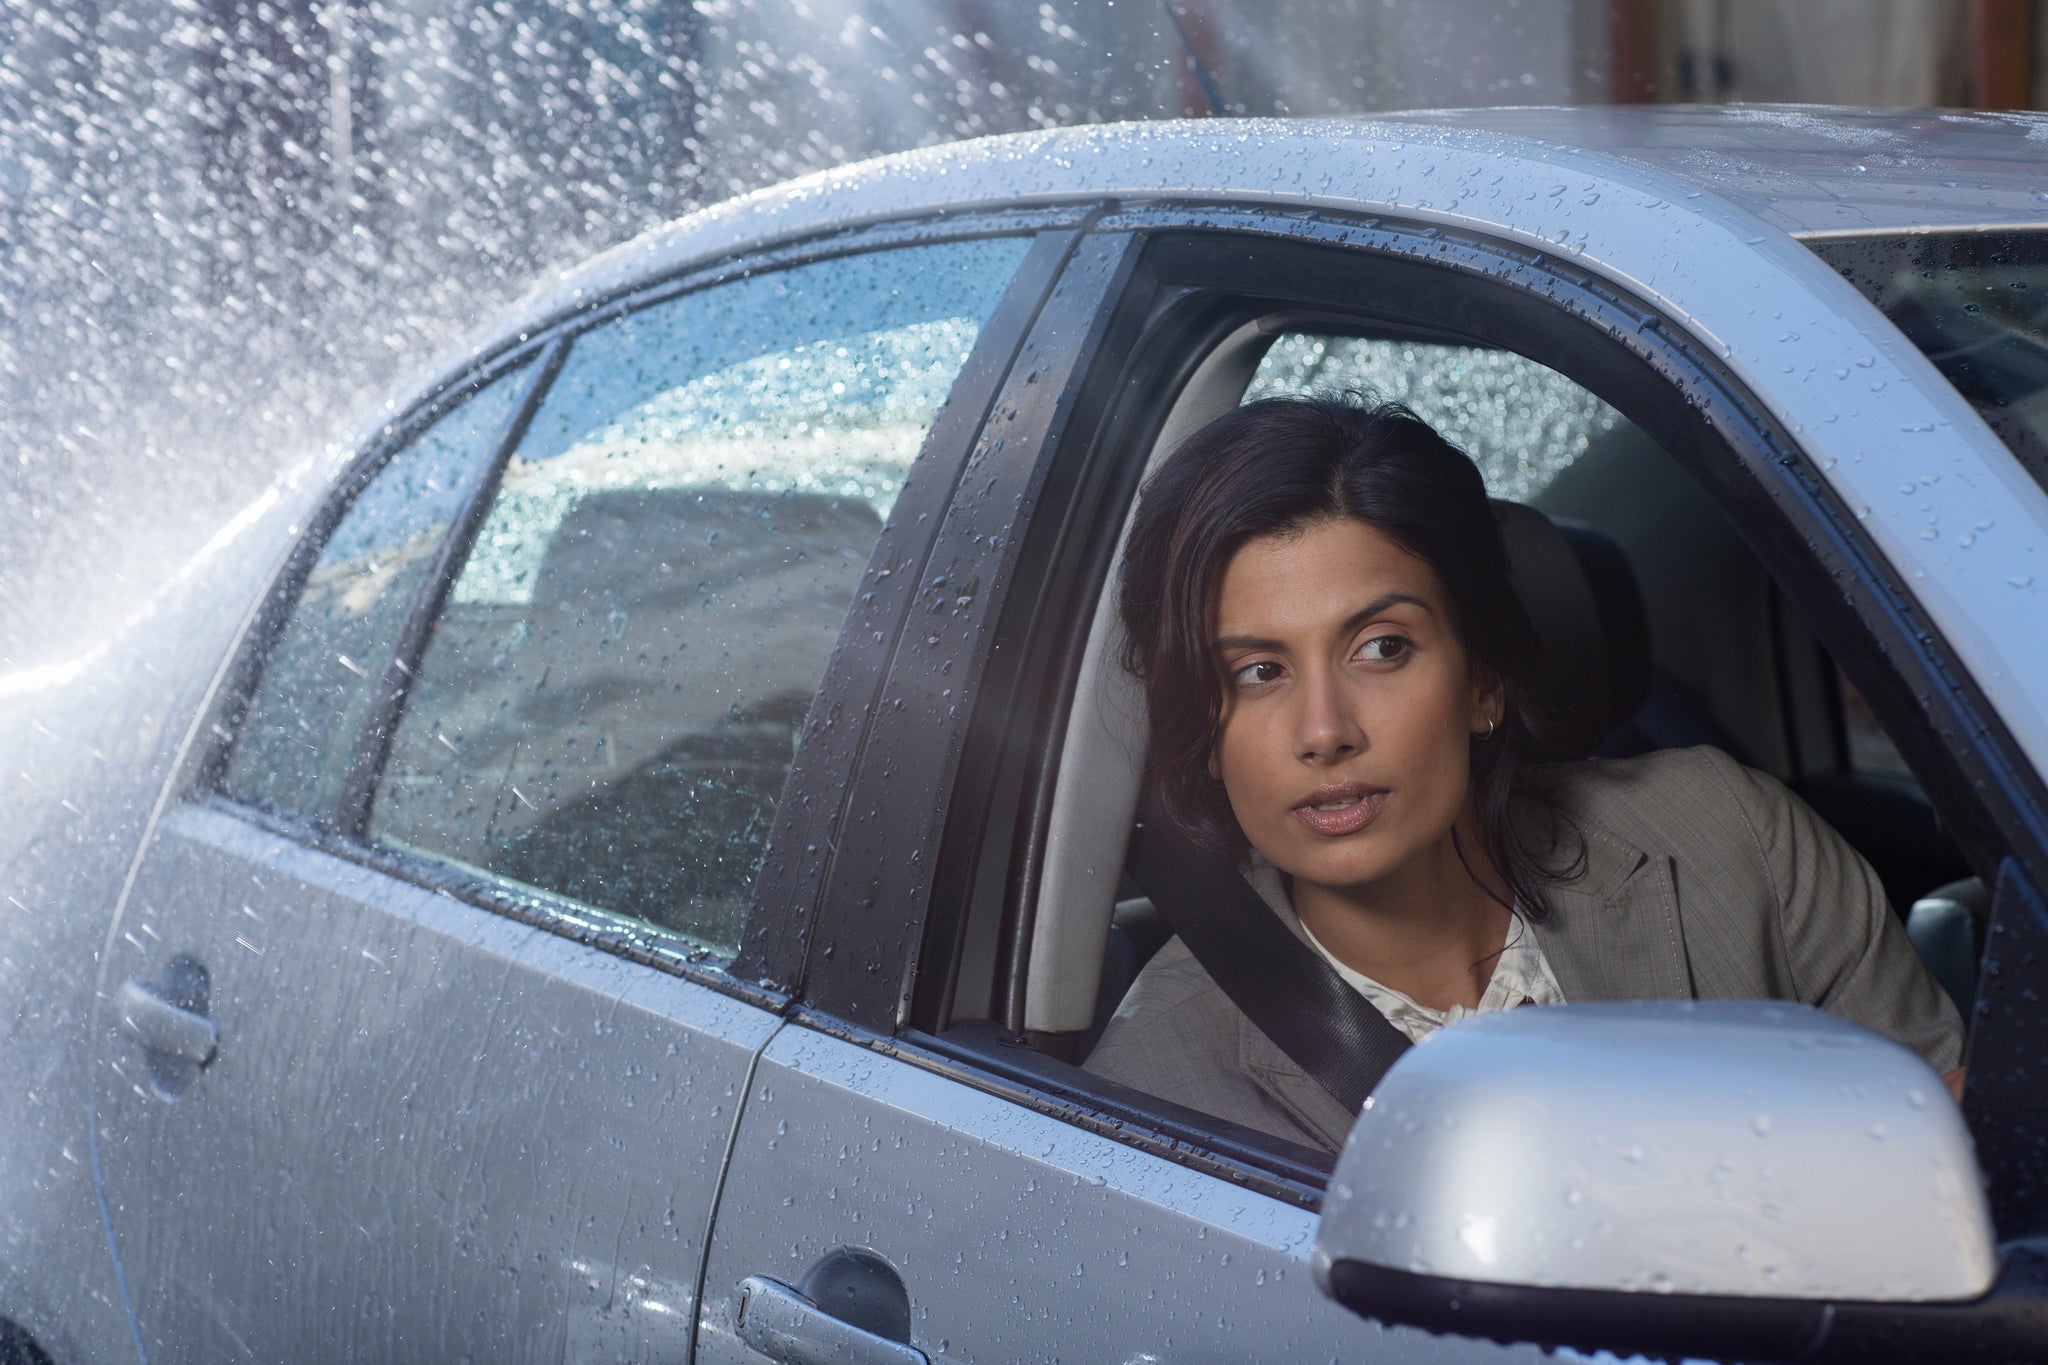 Most Helpful Advices On Driving In The Rain Safely